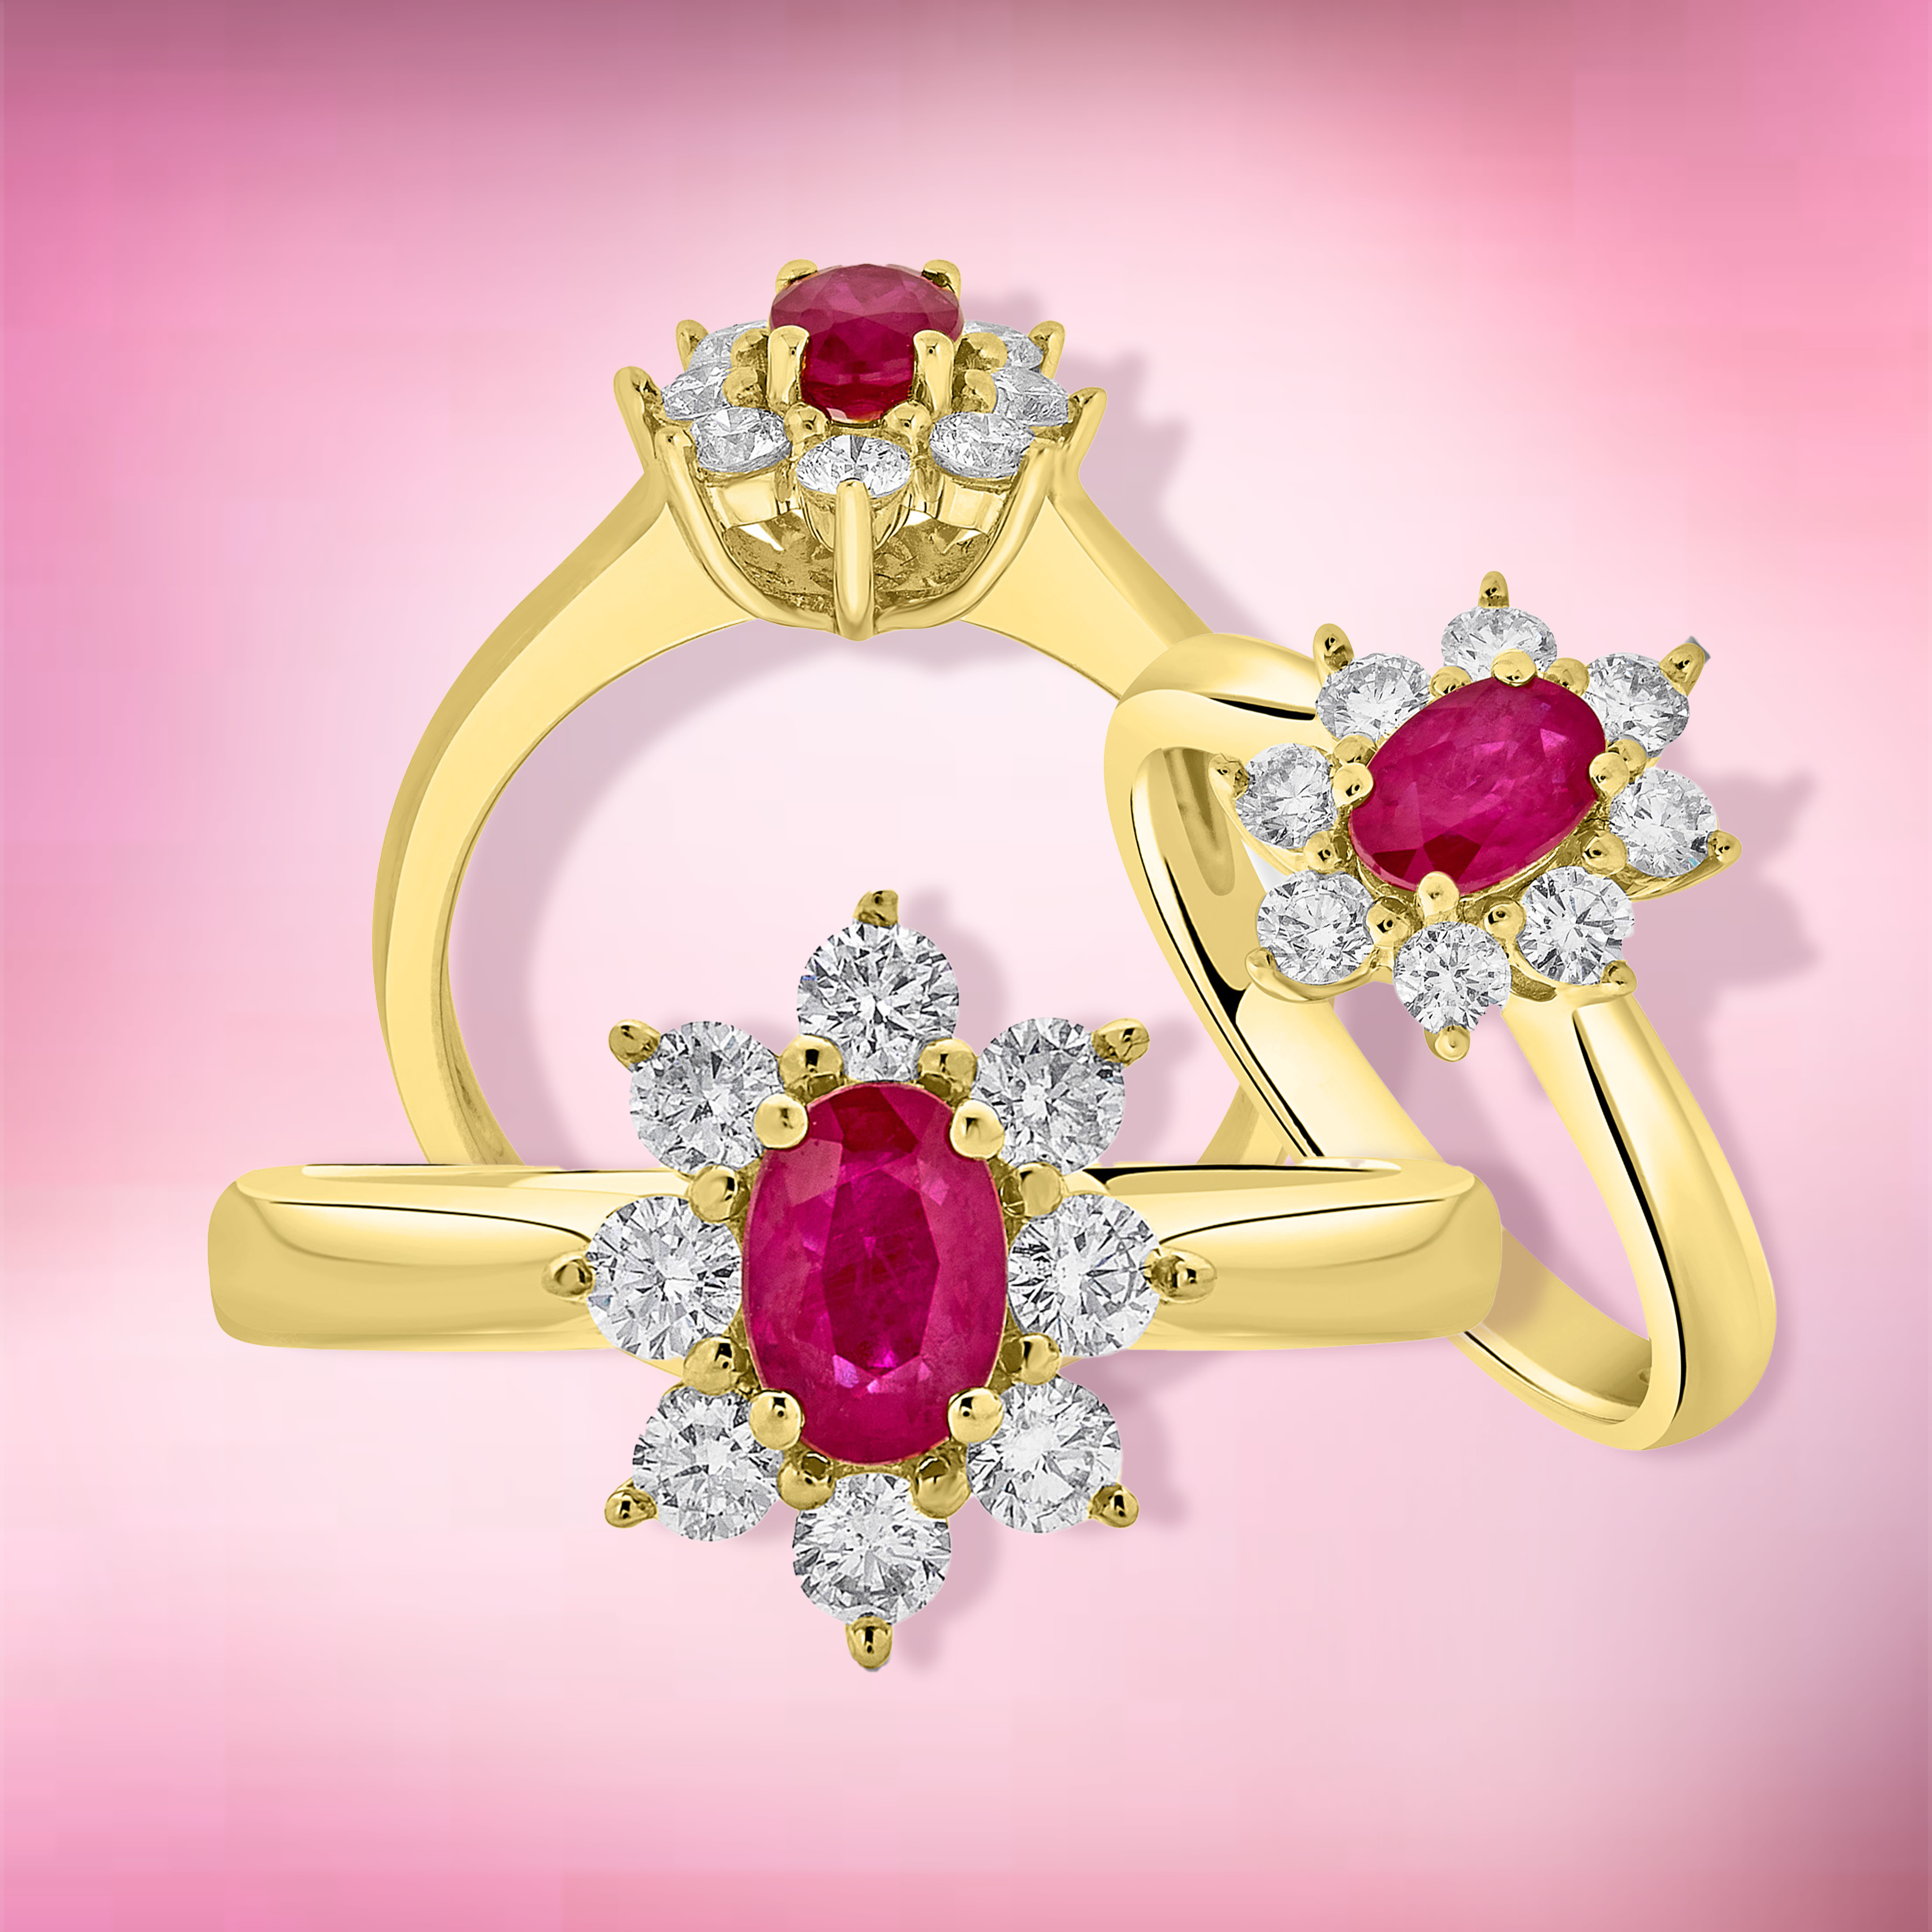 0.70ct Ruby ring with 0.47tct diamonds set in 14K yellow gold